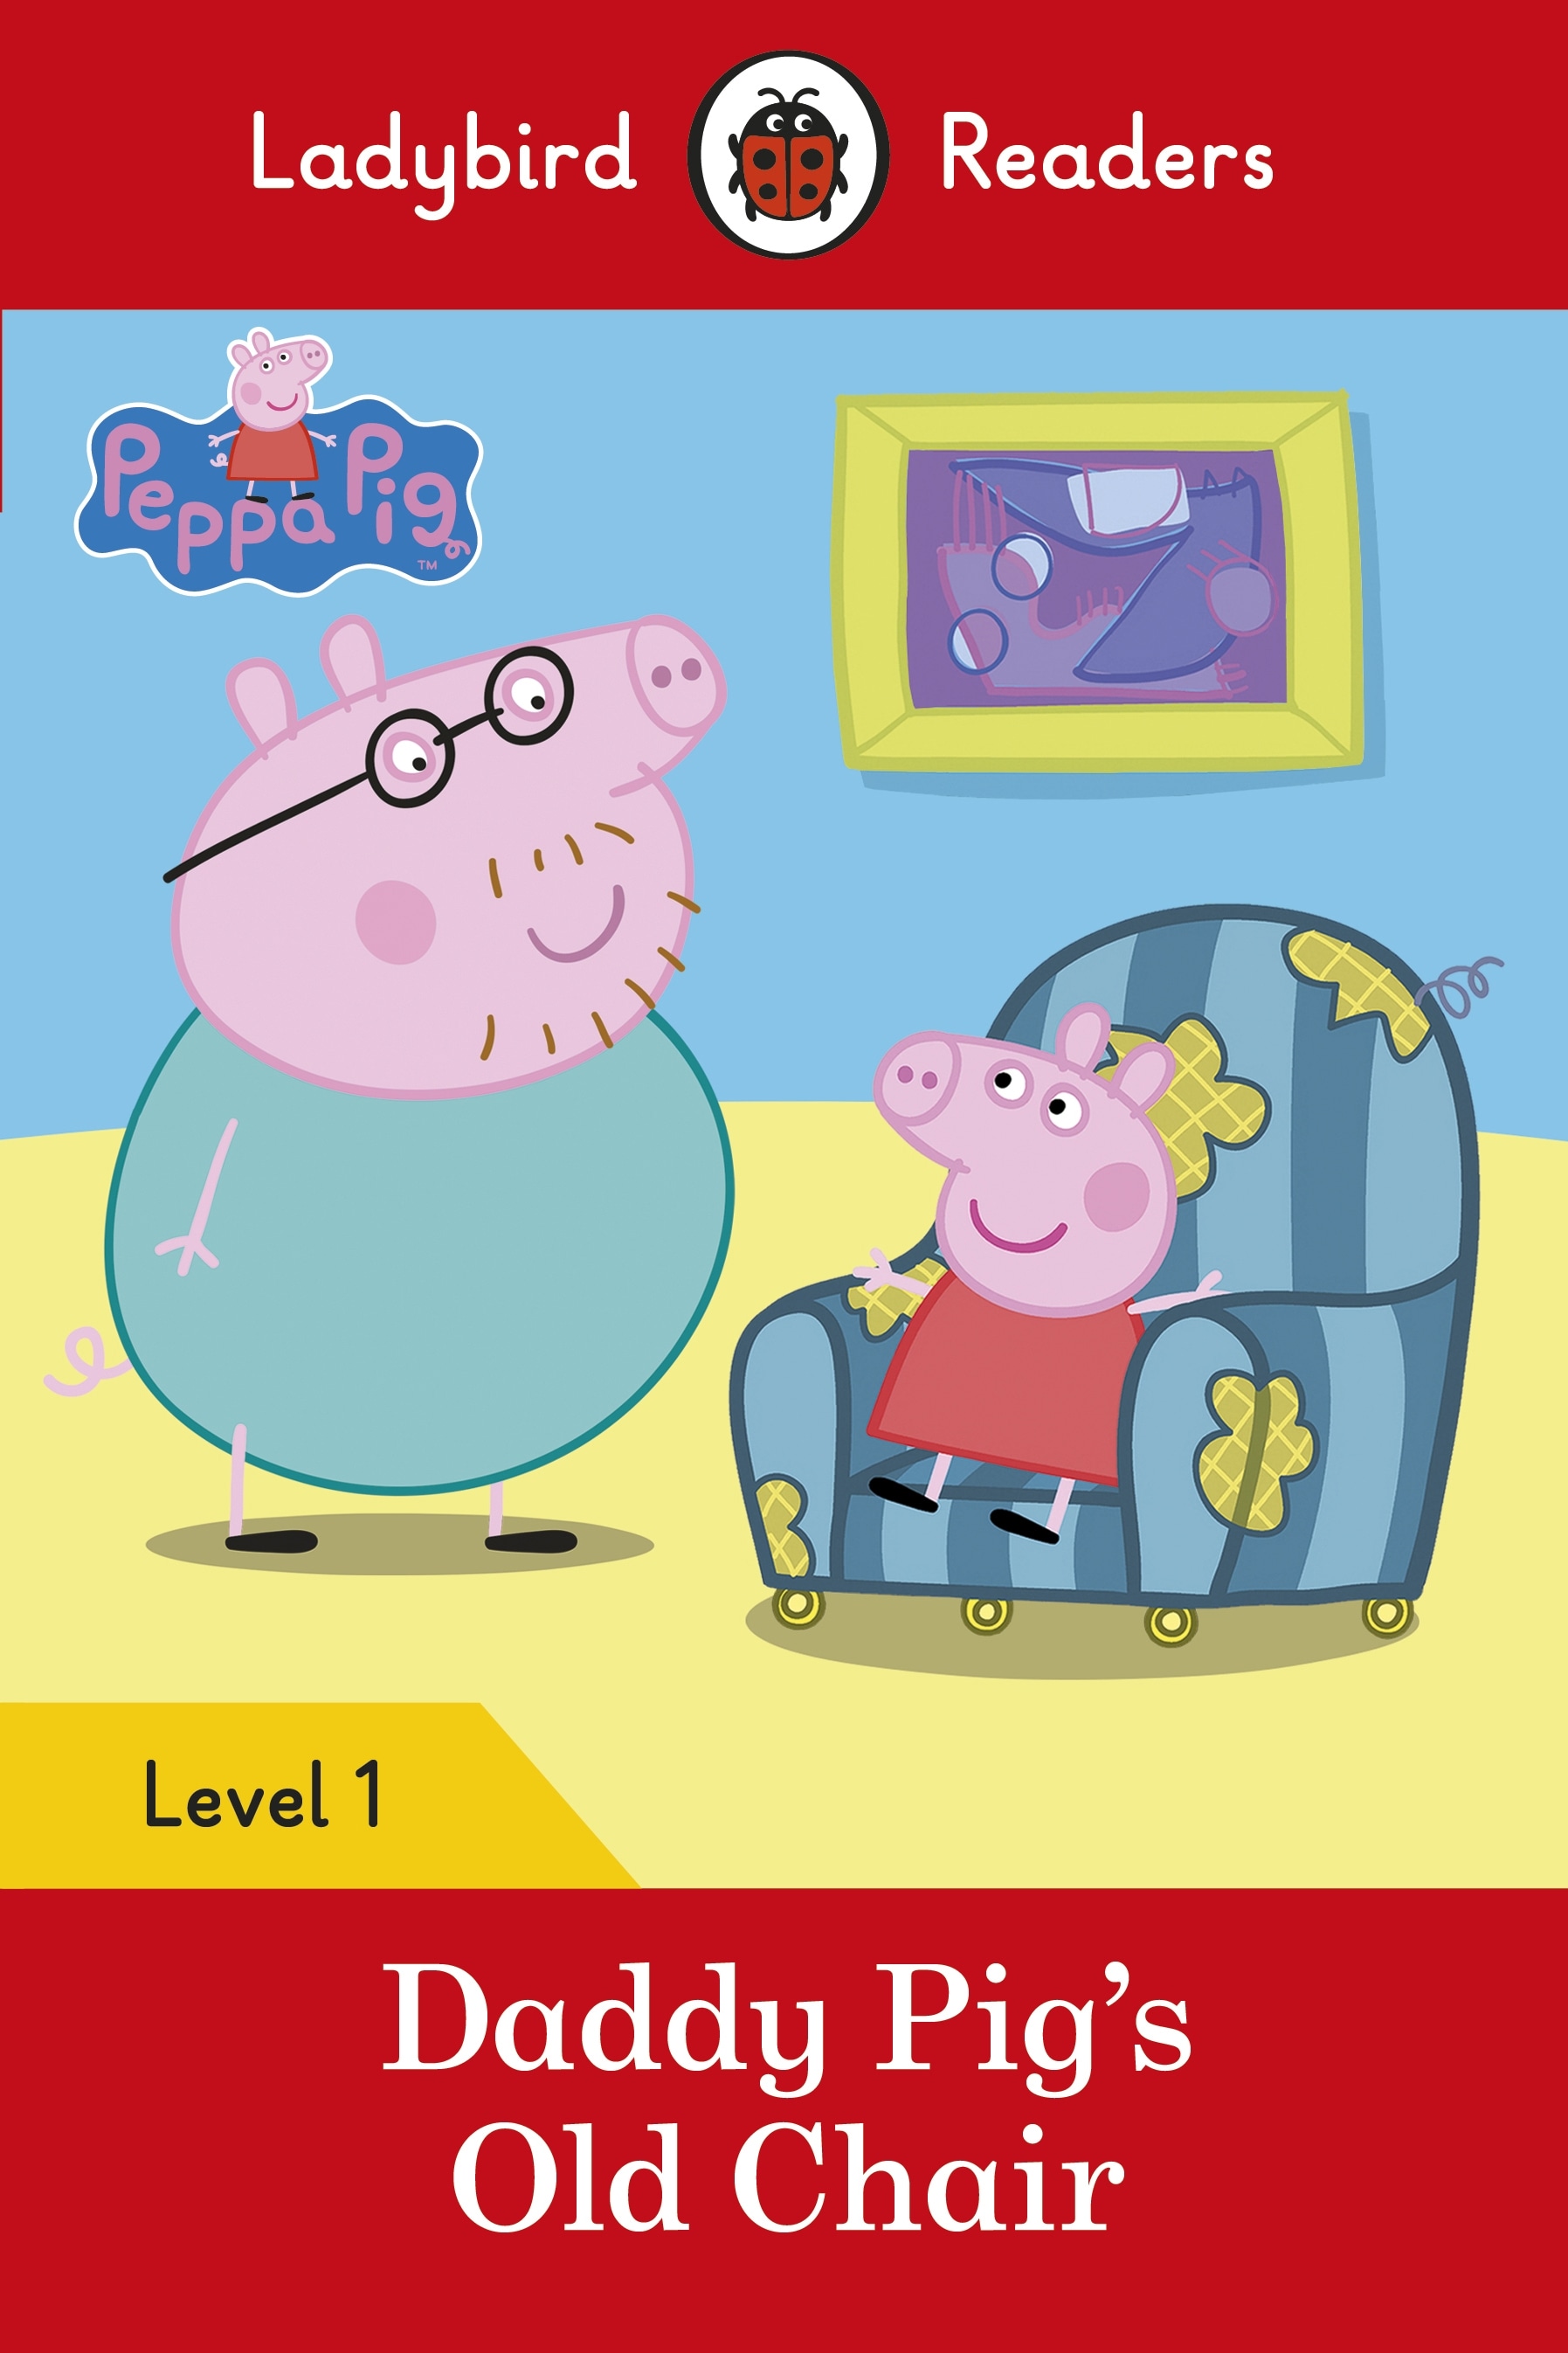 Book “Peppa Pig: Daddy Pig's Old Chair - Ladybird Readers Level 1” by Ladybird, Peppa Pig — January 26, 2017